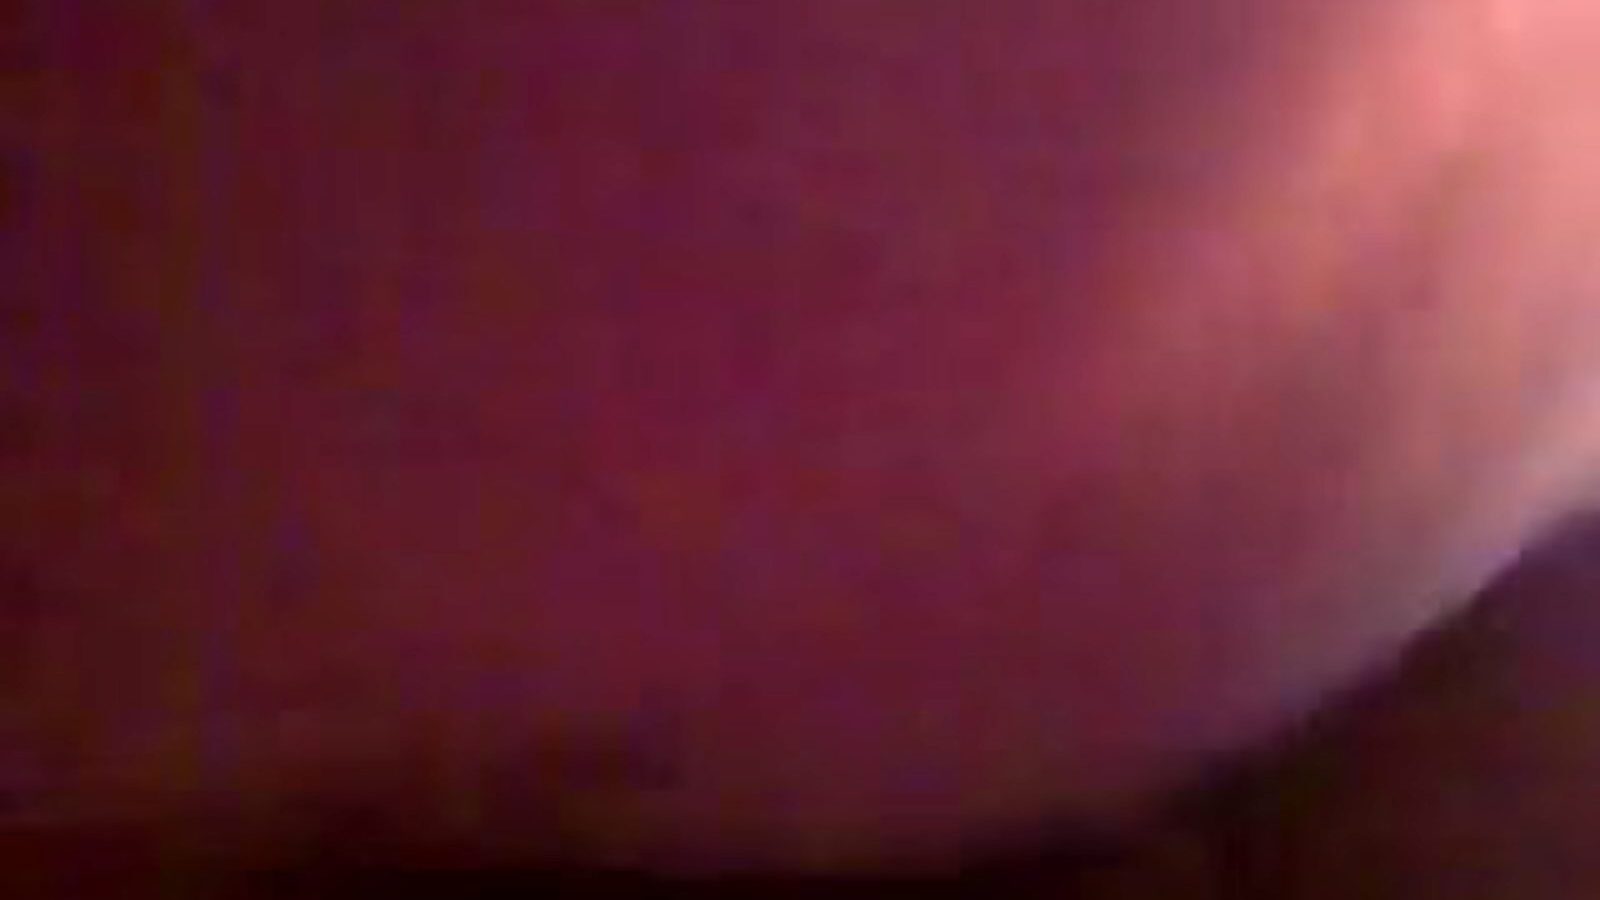 Une Explosion De Jouissance, Free Tight Pussy Porn Video 3c Watch Une Explosion De Jouissance clip on xHamster, the largest fucky-fucky tube website with tons of free French Asian & Tight Pussy pornography movies